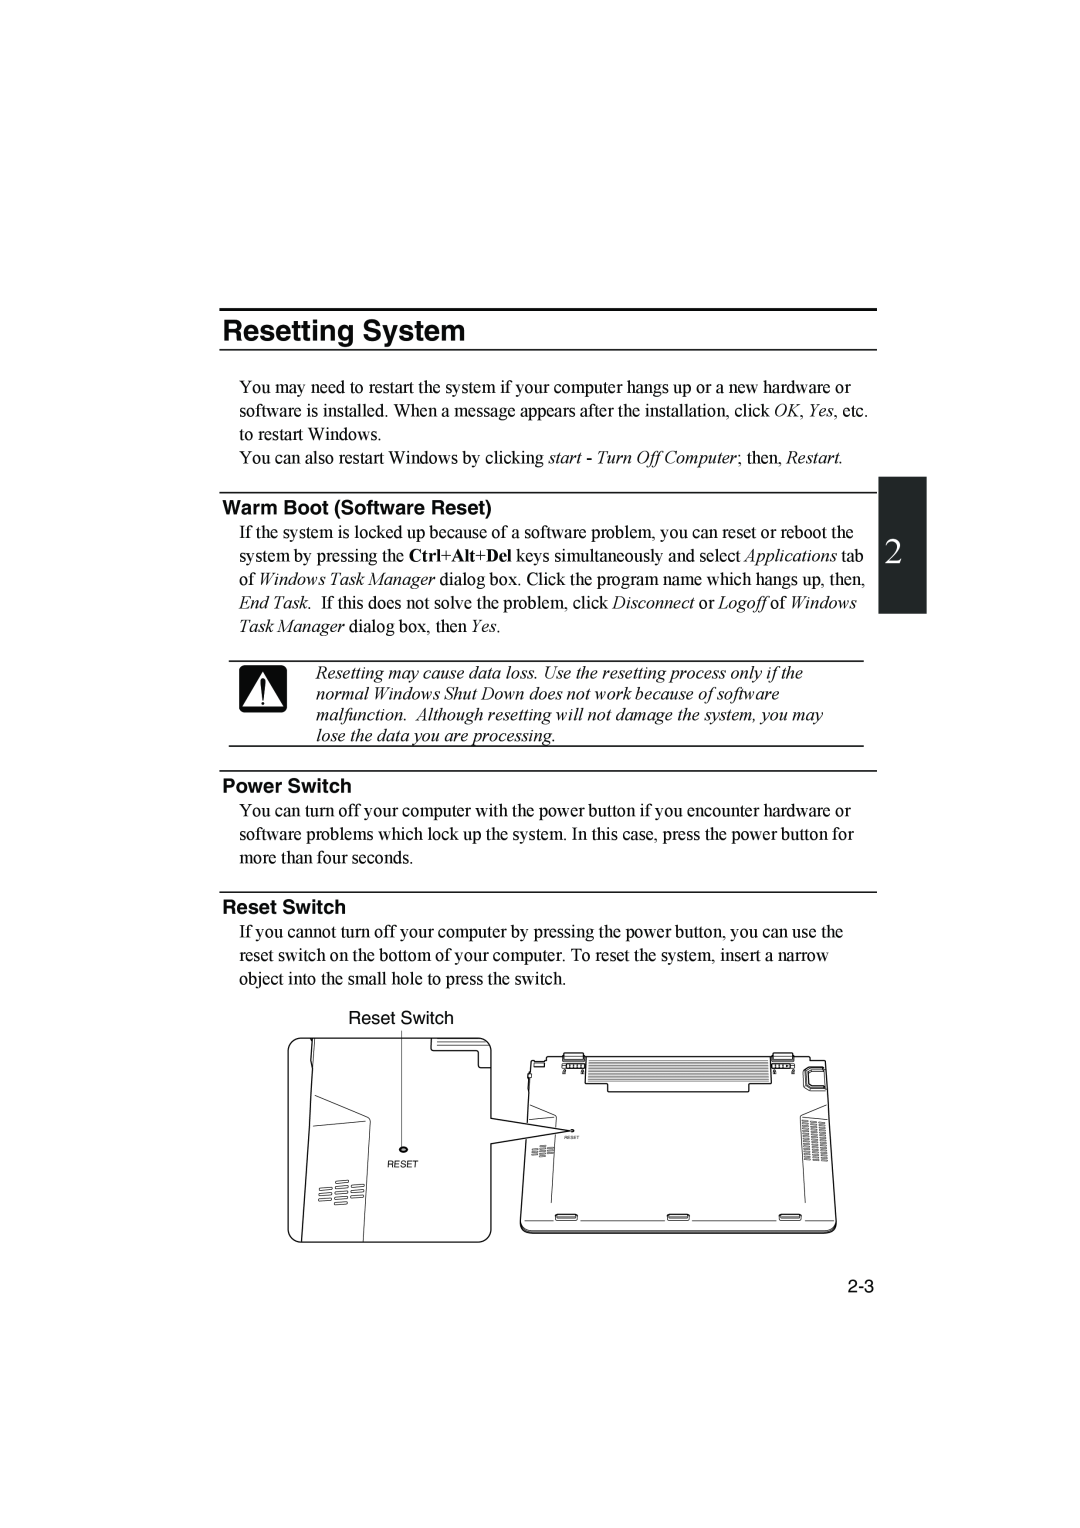 Sharp PC-MM1 manual Resetting System, Warm Boot Software Reset, Power Switch, Reset Switch 